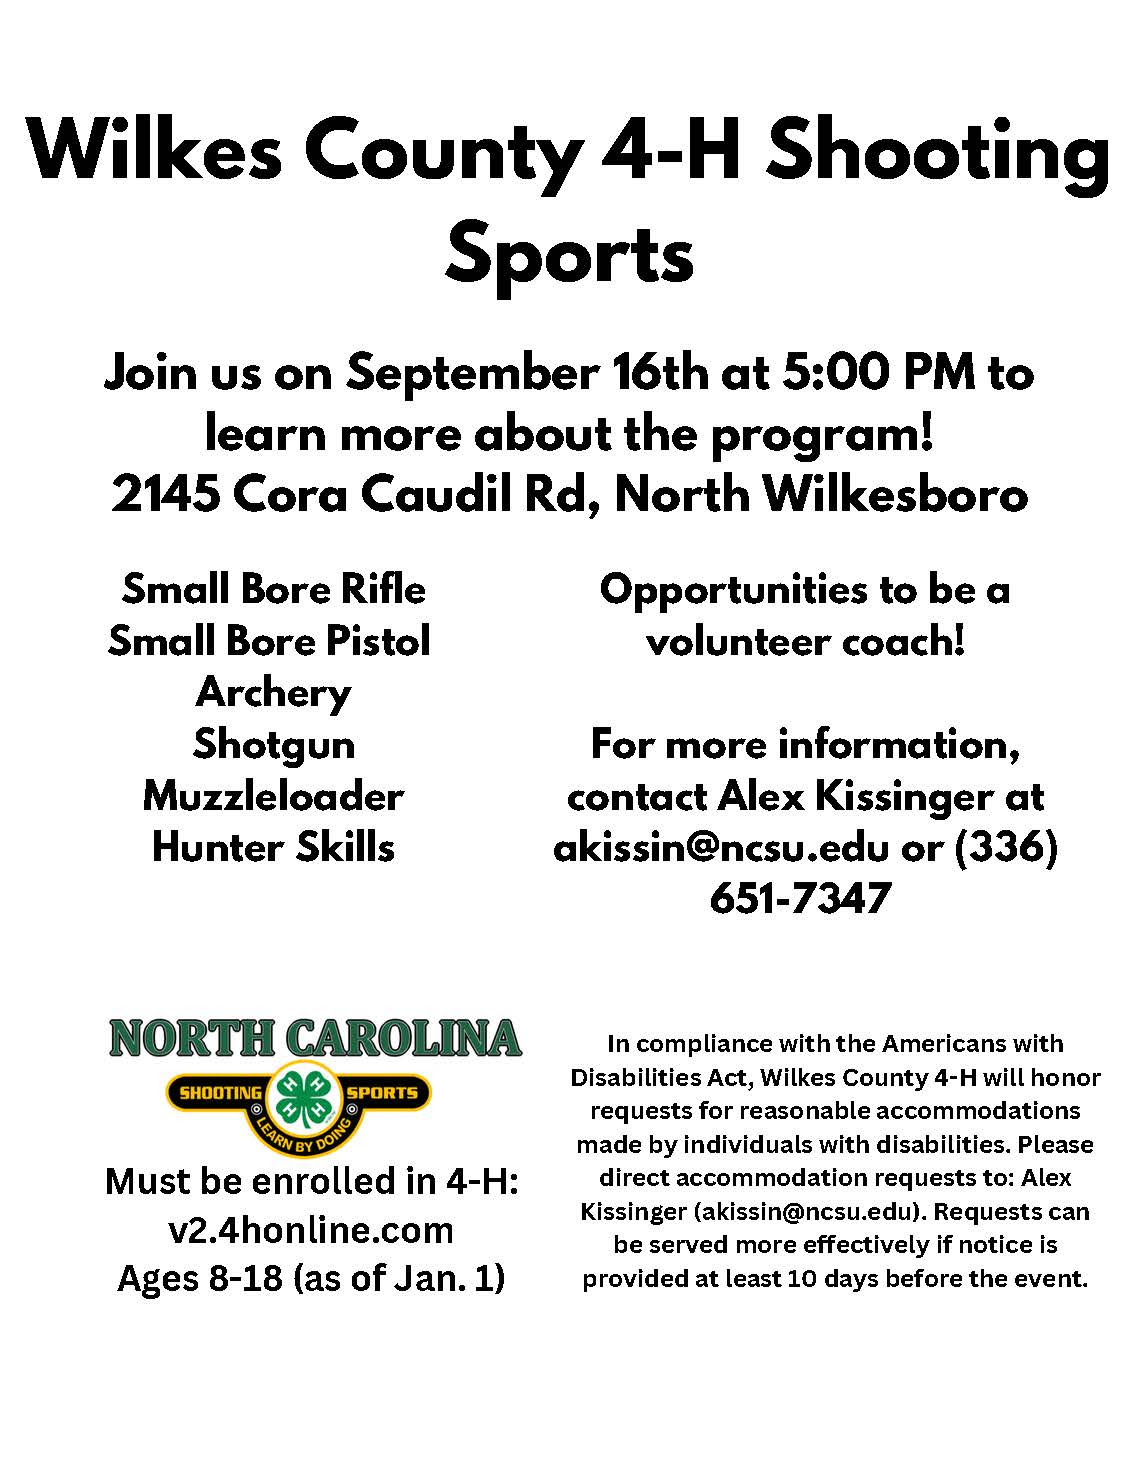 Shooting Sports Interest Event